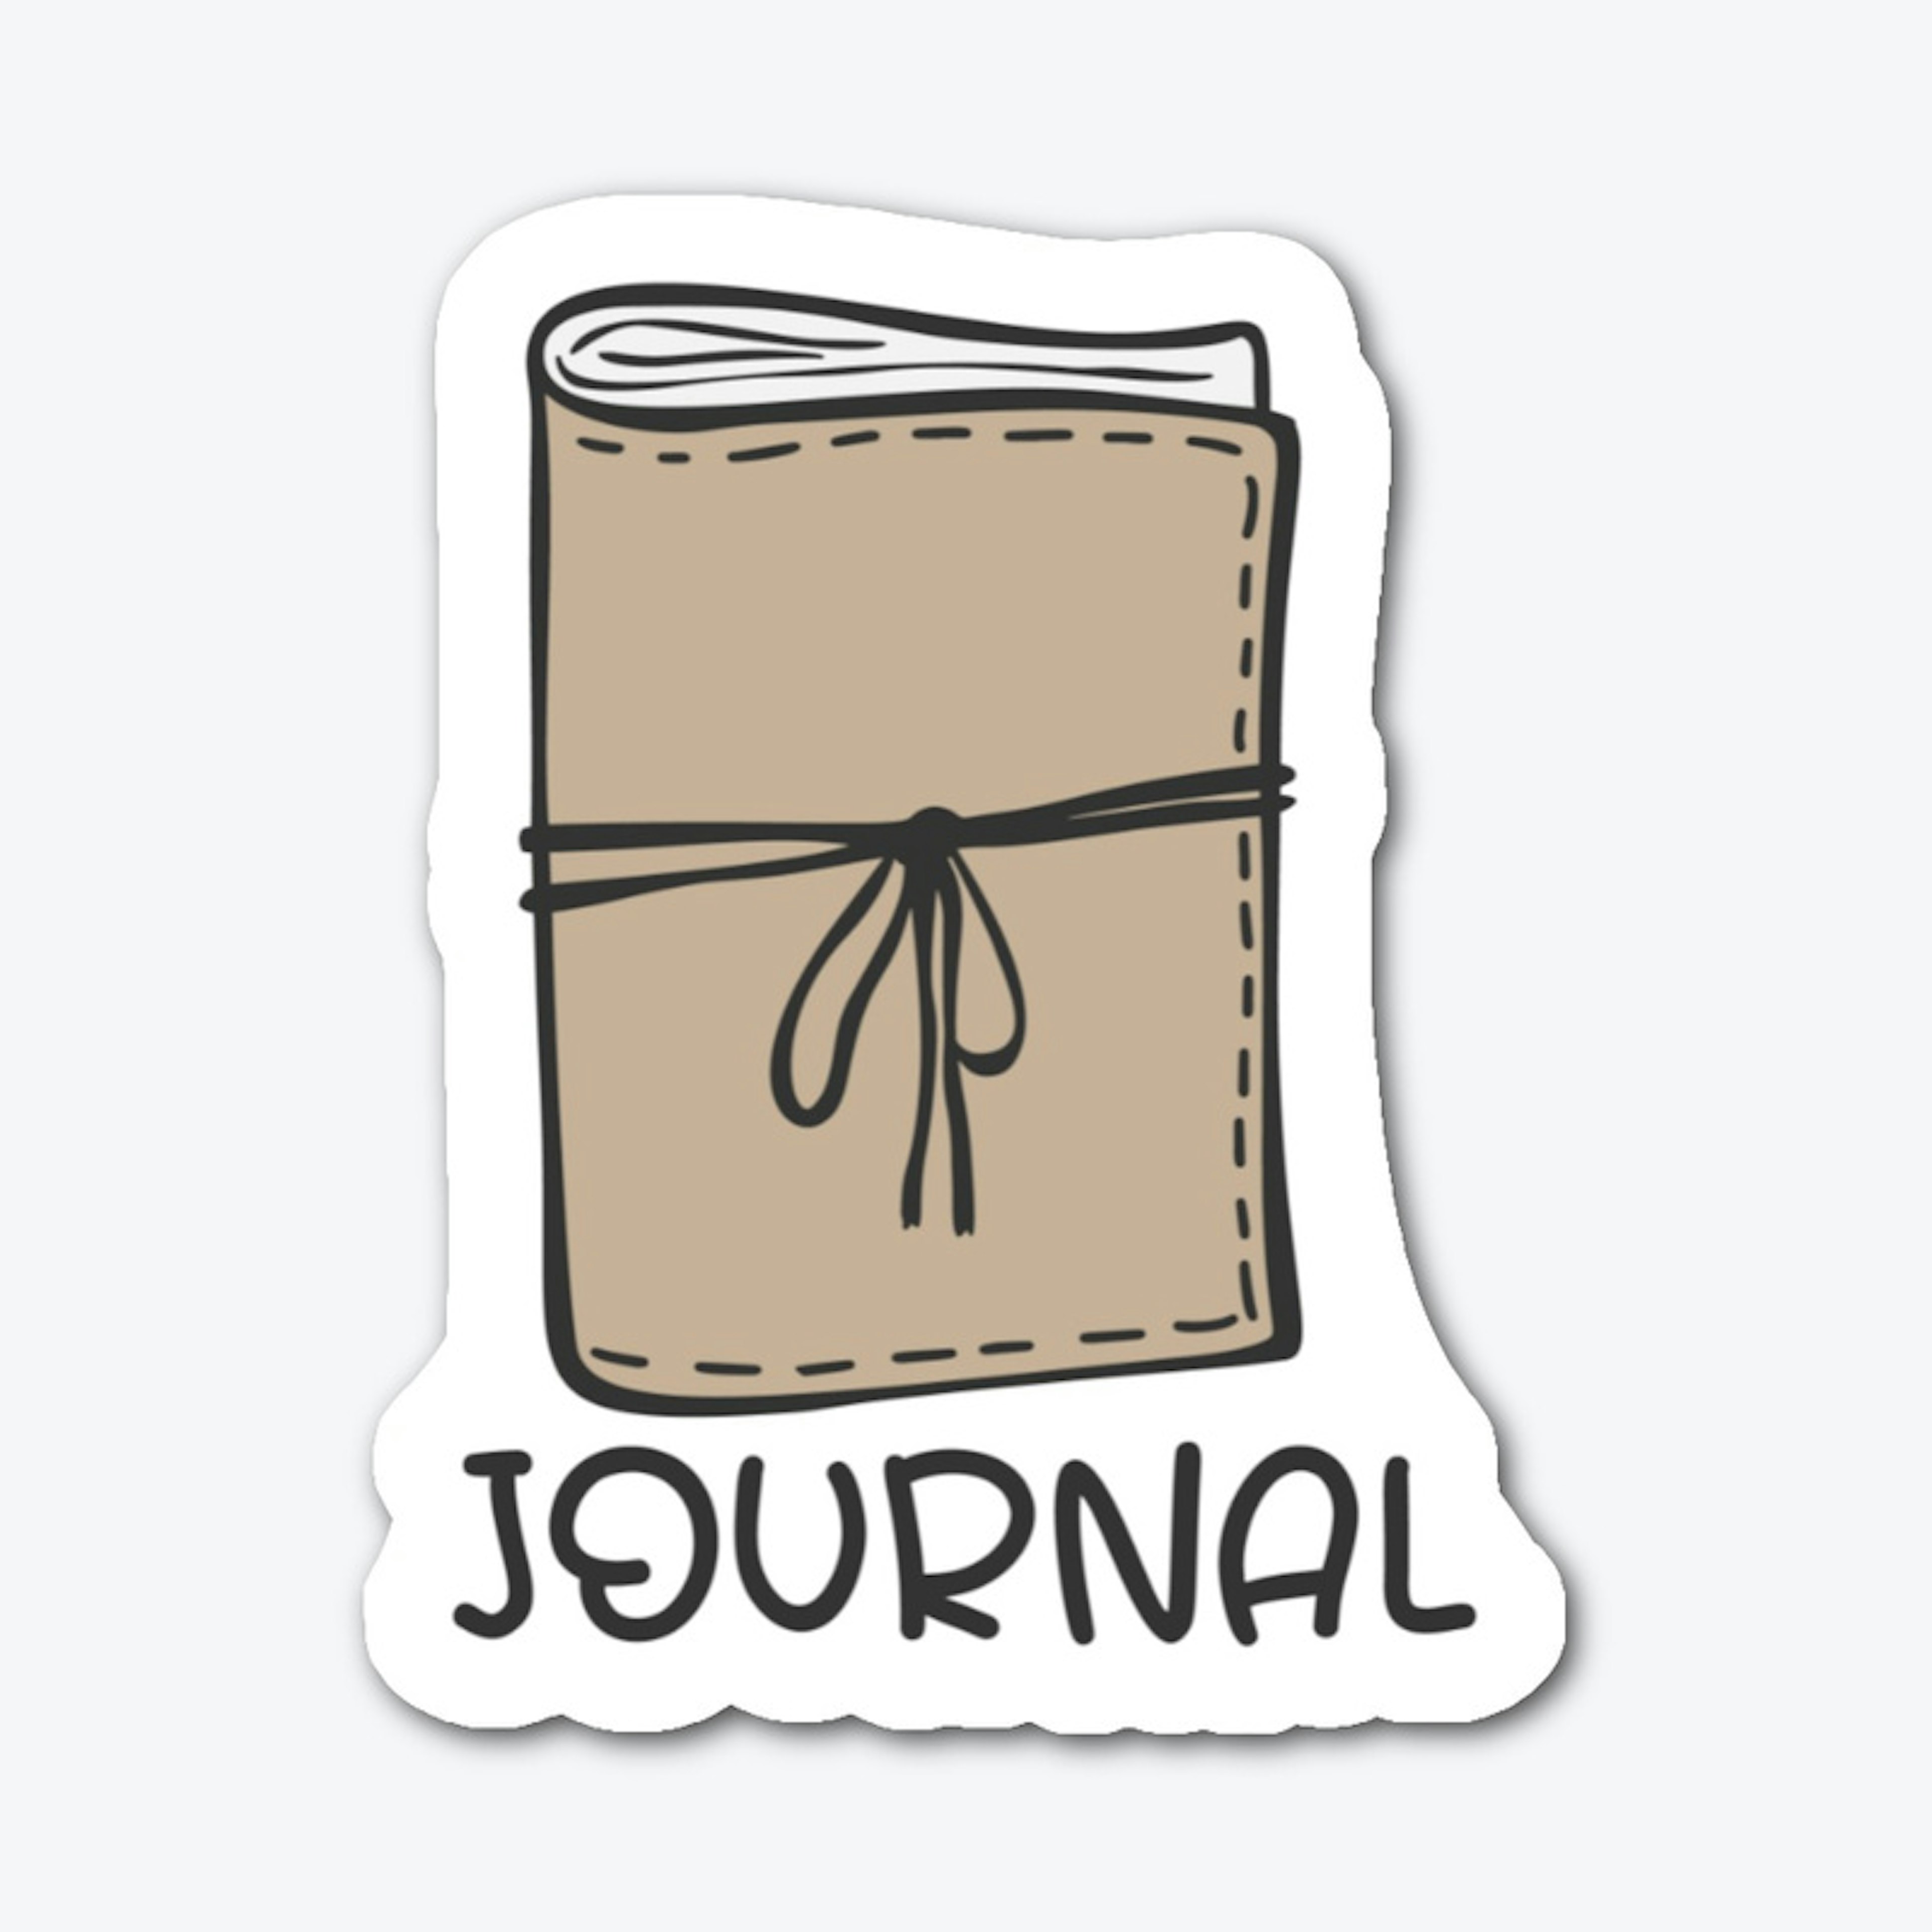 The Journal Life